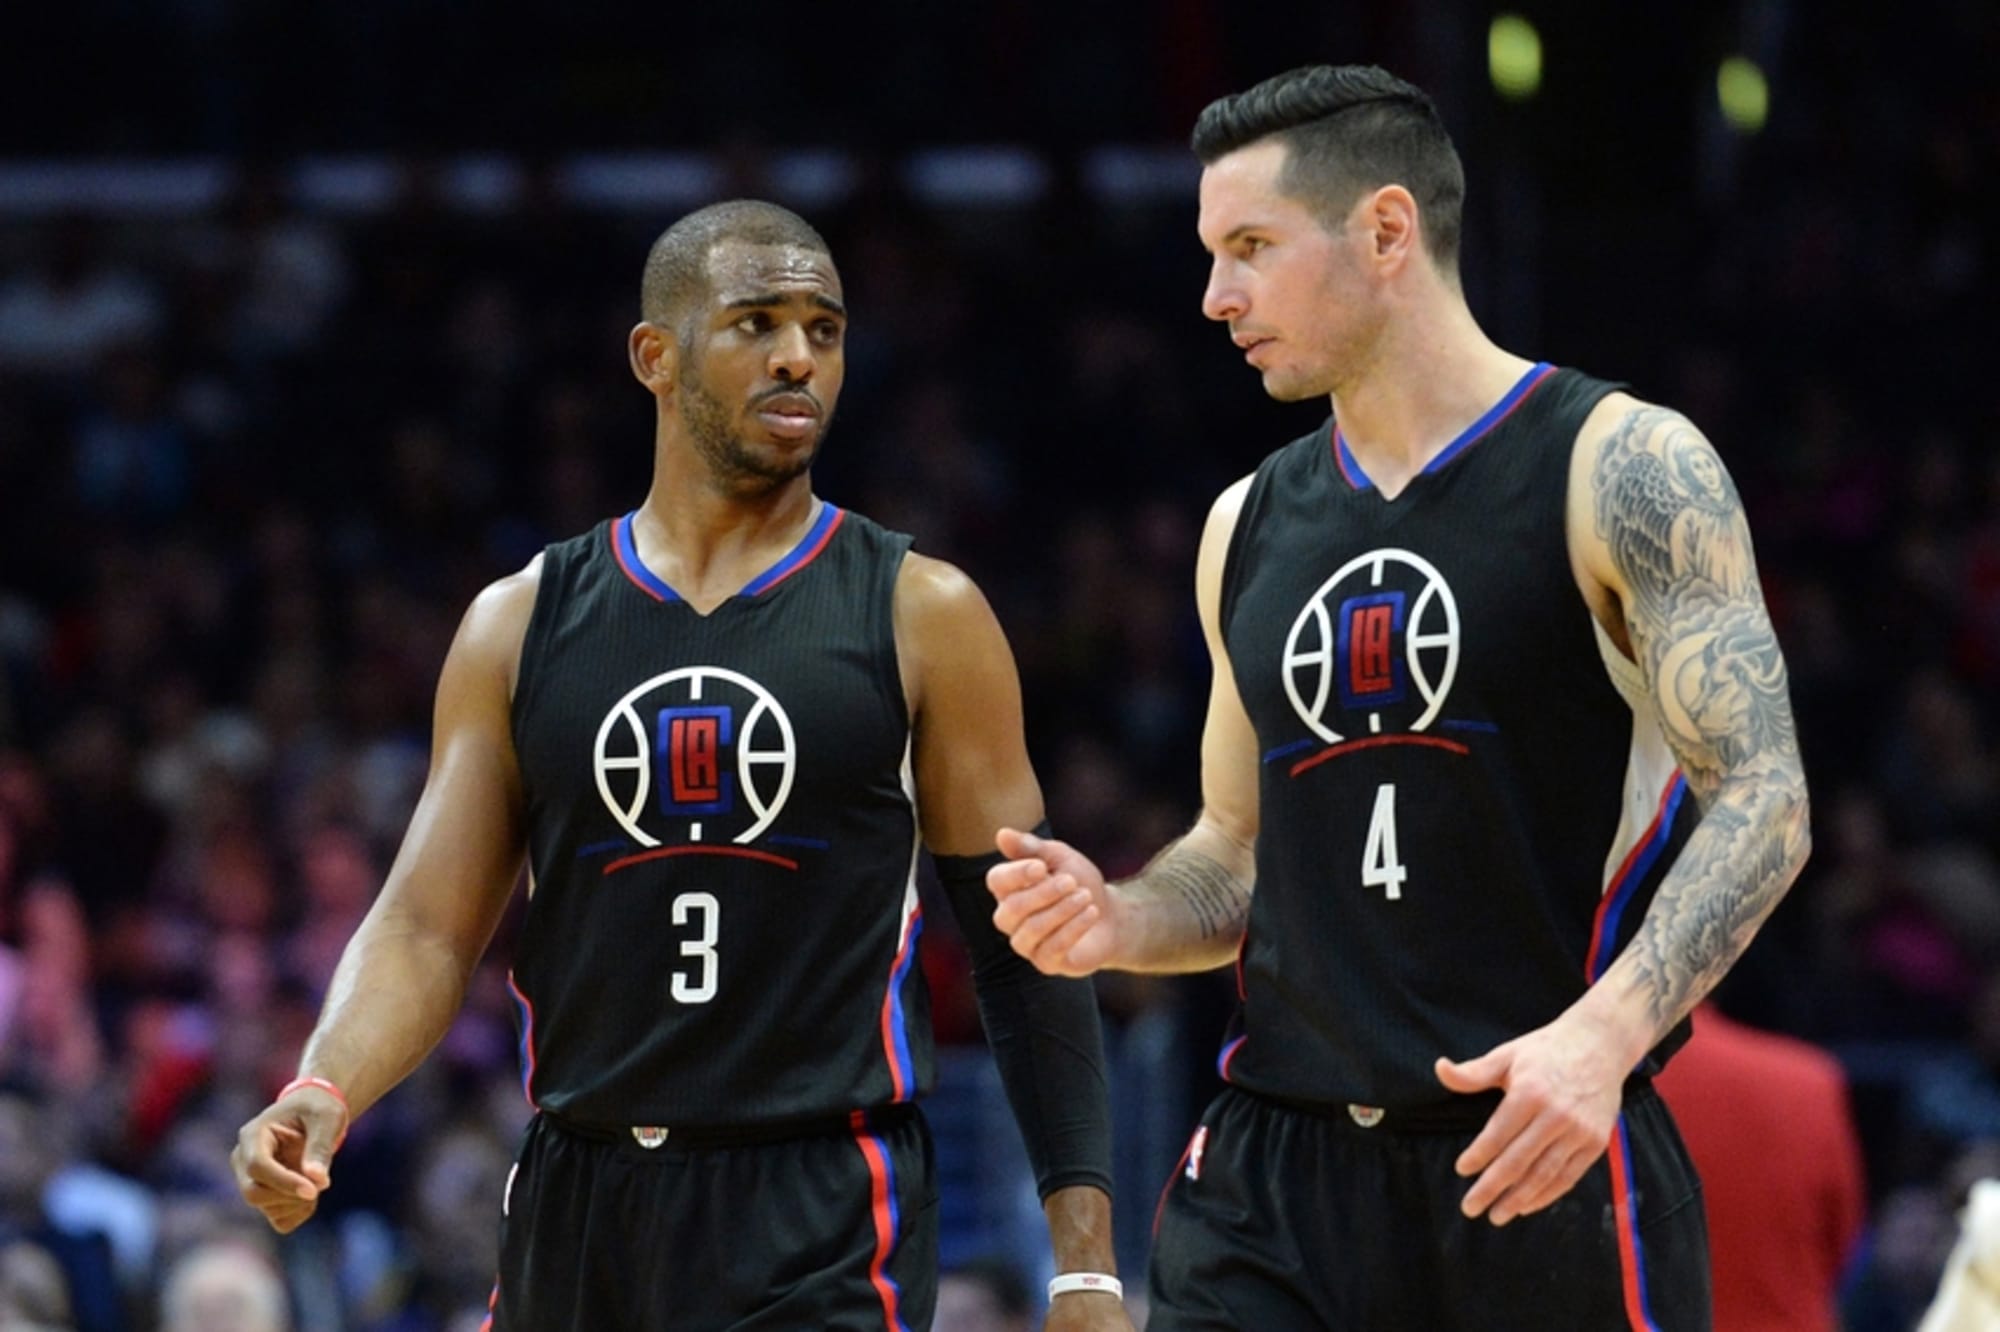 NBA All-Star: Clippers' J.J. Redick preparing for 3-point contest in a  unique way – Daily News